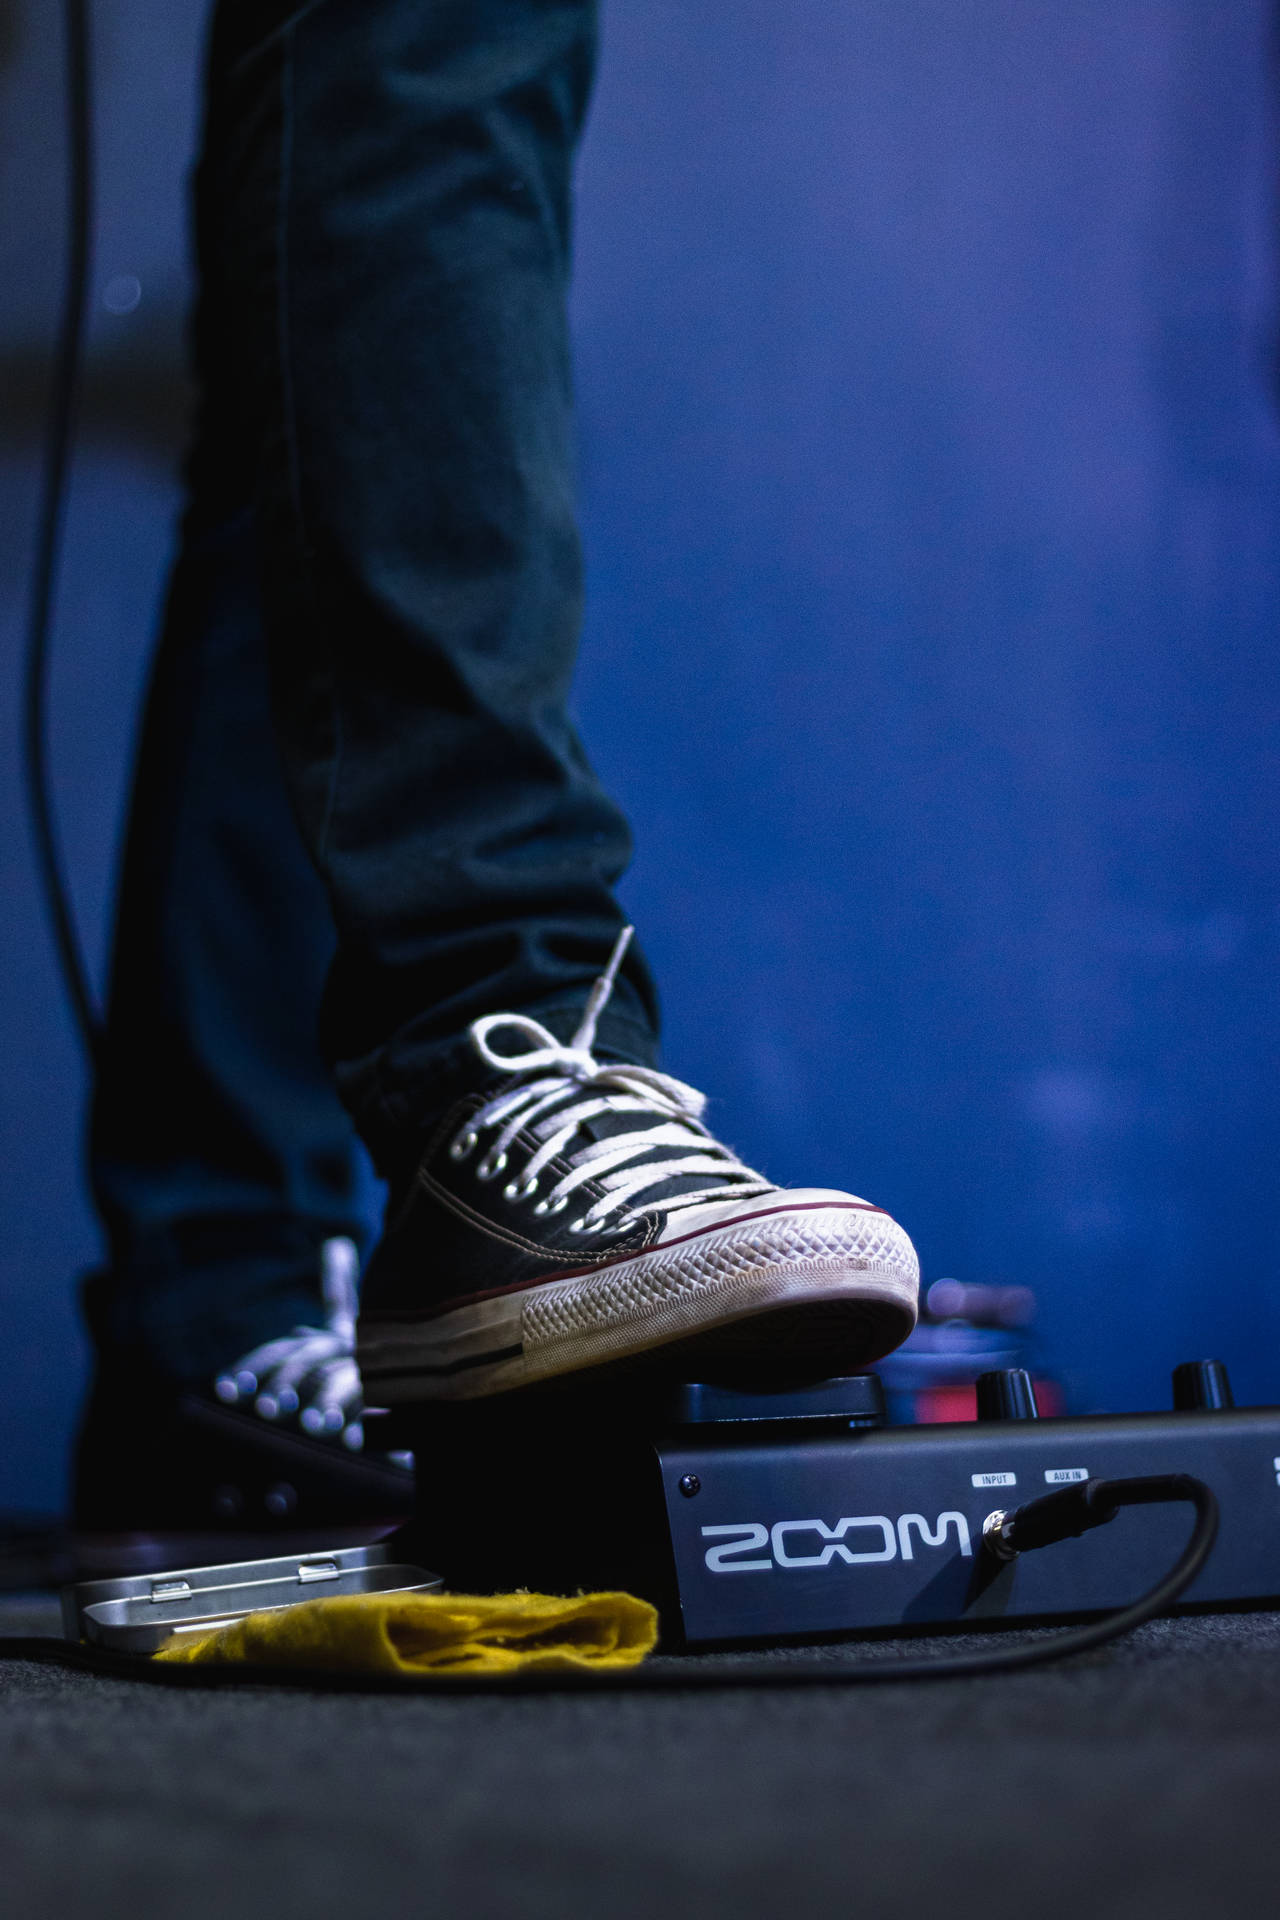 Converse Sneakers On Amplifier Background